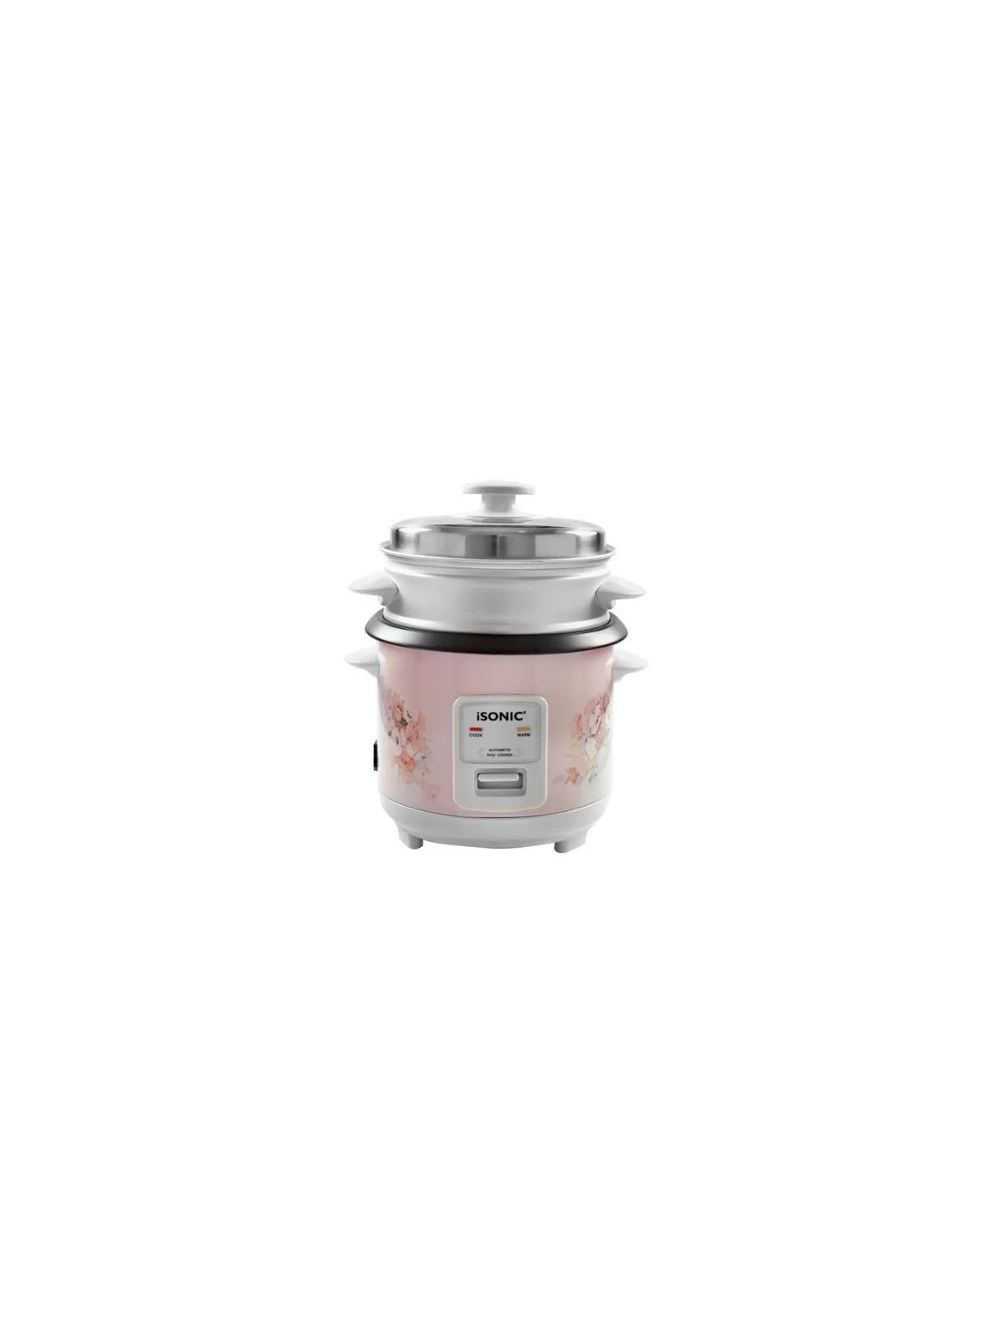 iSONIC 0.6L Automatic Rice Cooker-iRC 756